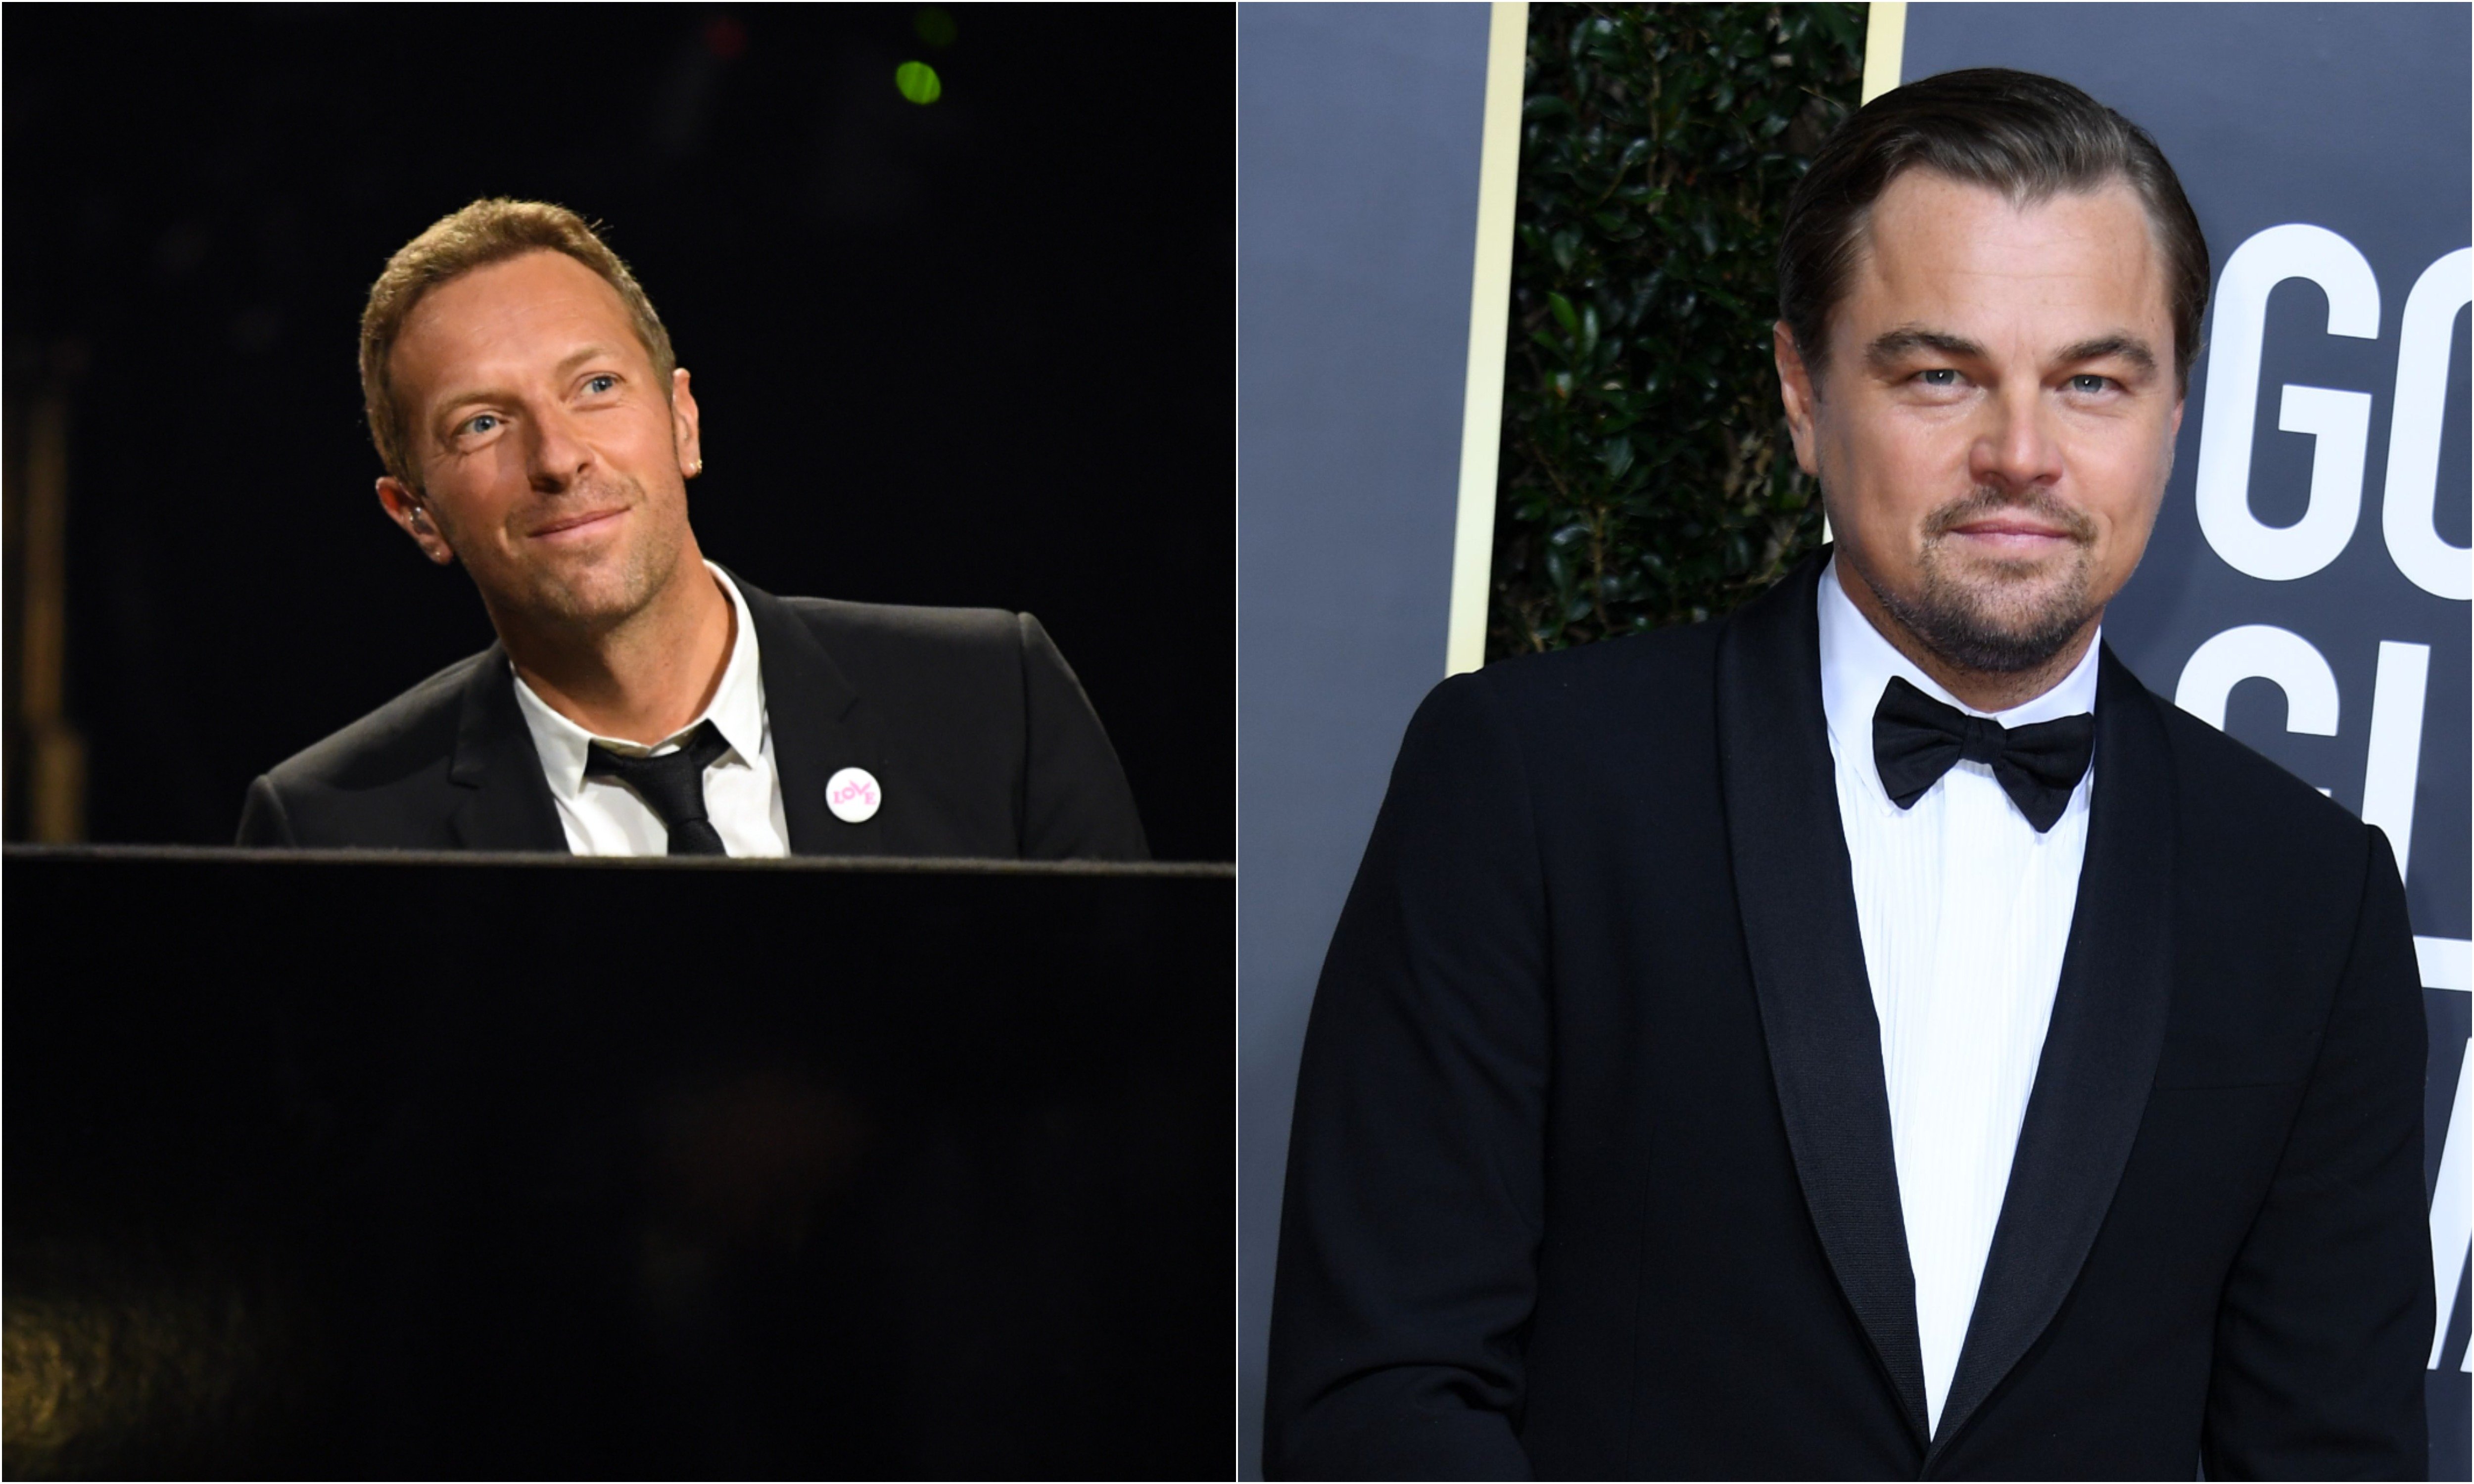 A joined photo of Coldplay's Chris Martin and actor Leonardo DiCaprio